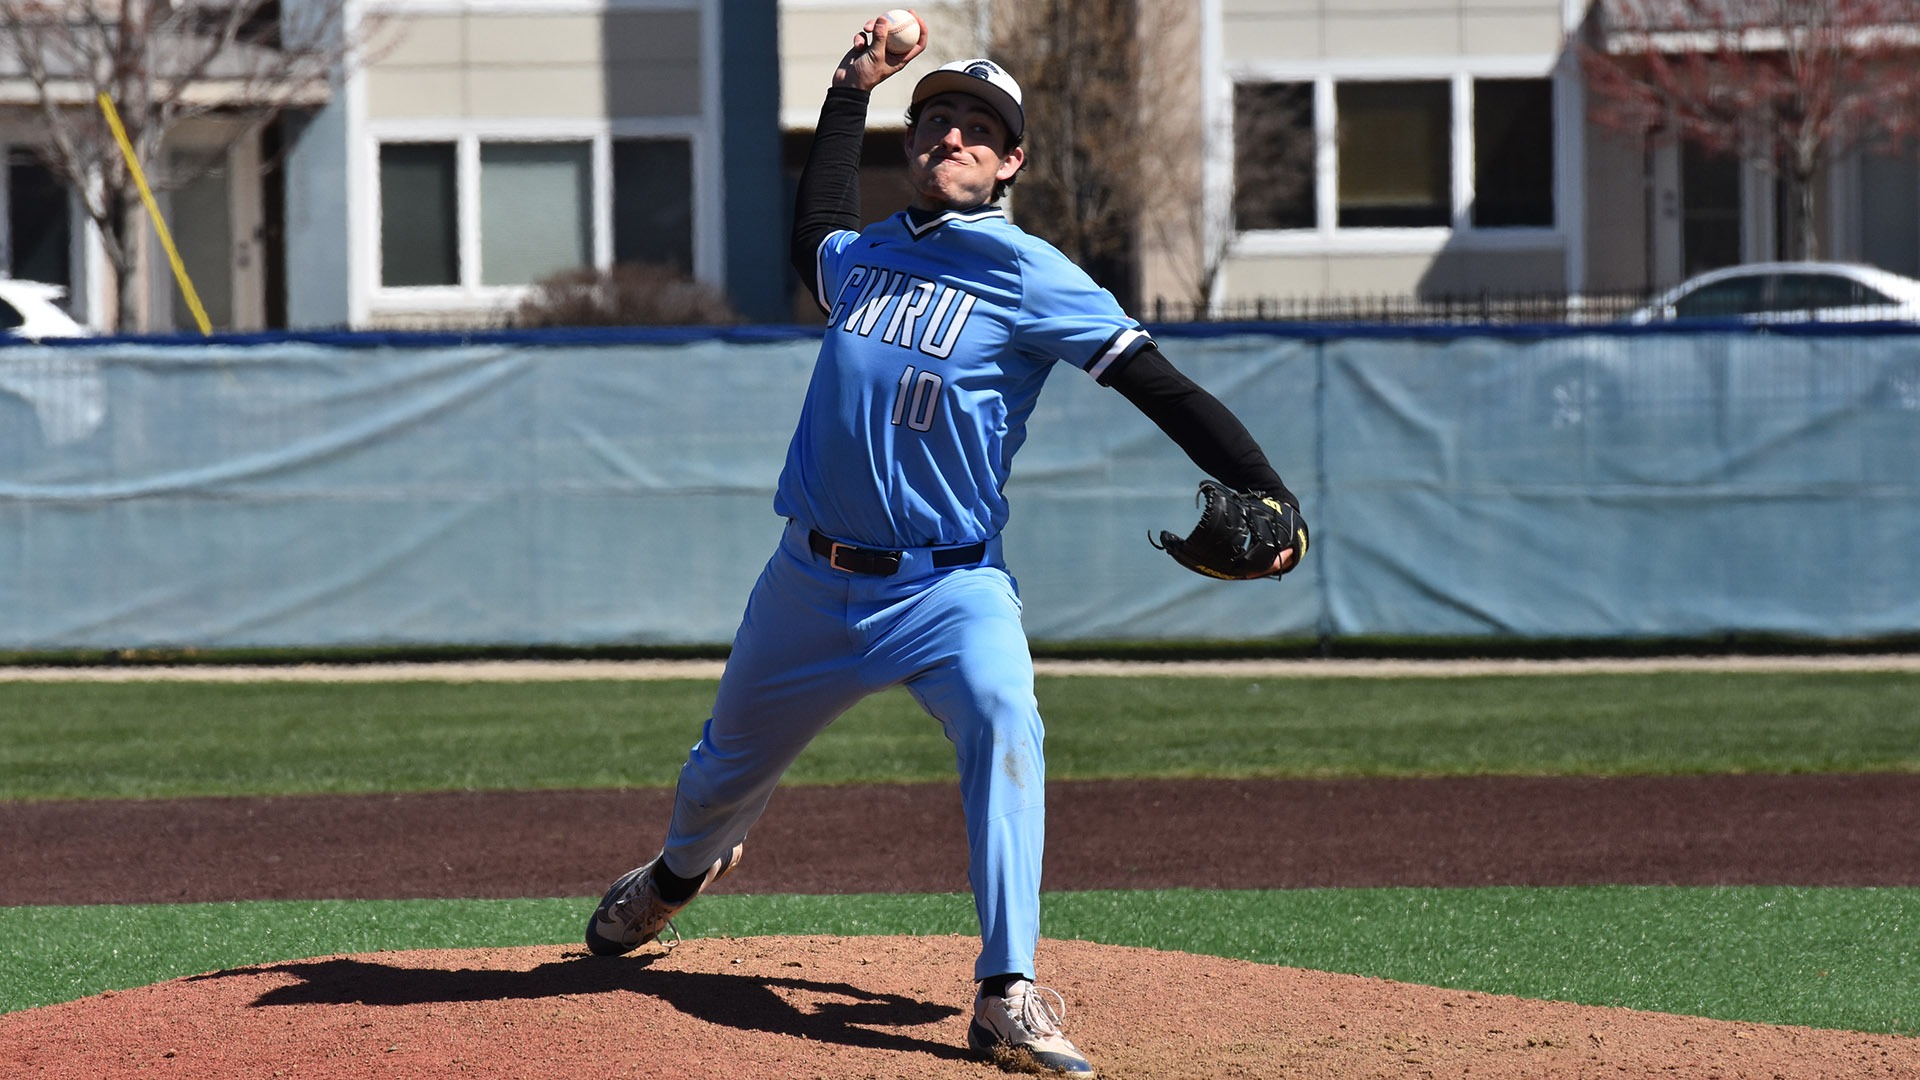 On April 14, first-year pitcher Tyler Stillson pitched five innings against Ohio Wesleyan while also batting 2-for-3 with a grand slam and 6 runs batted-in.